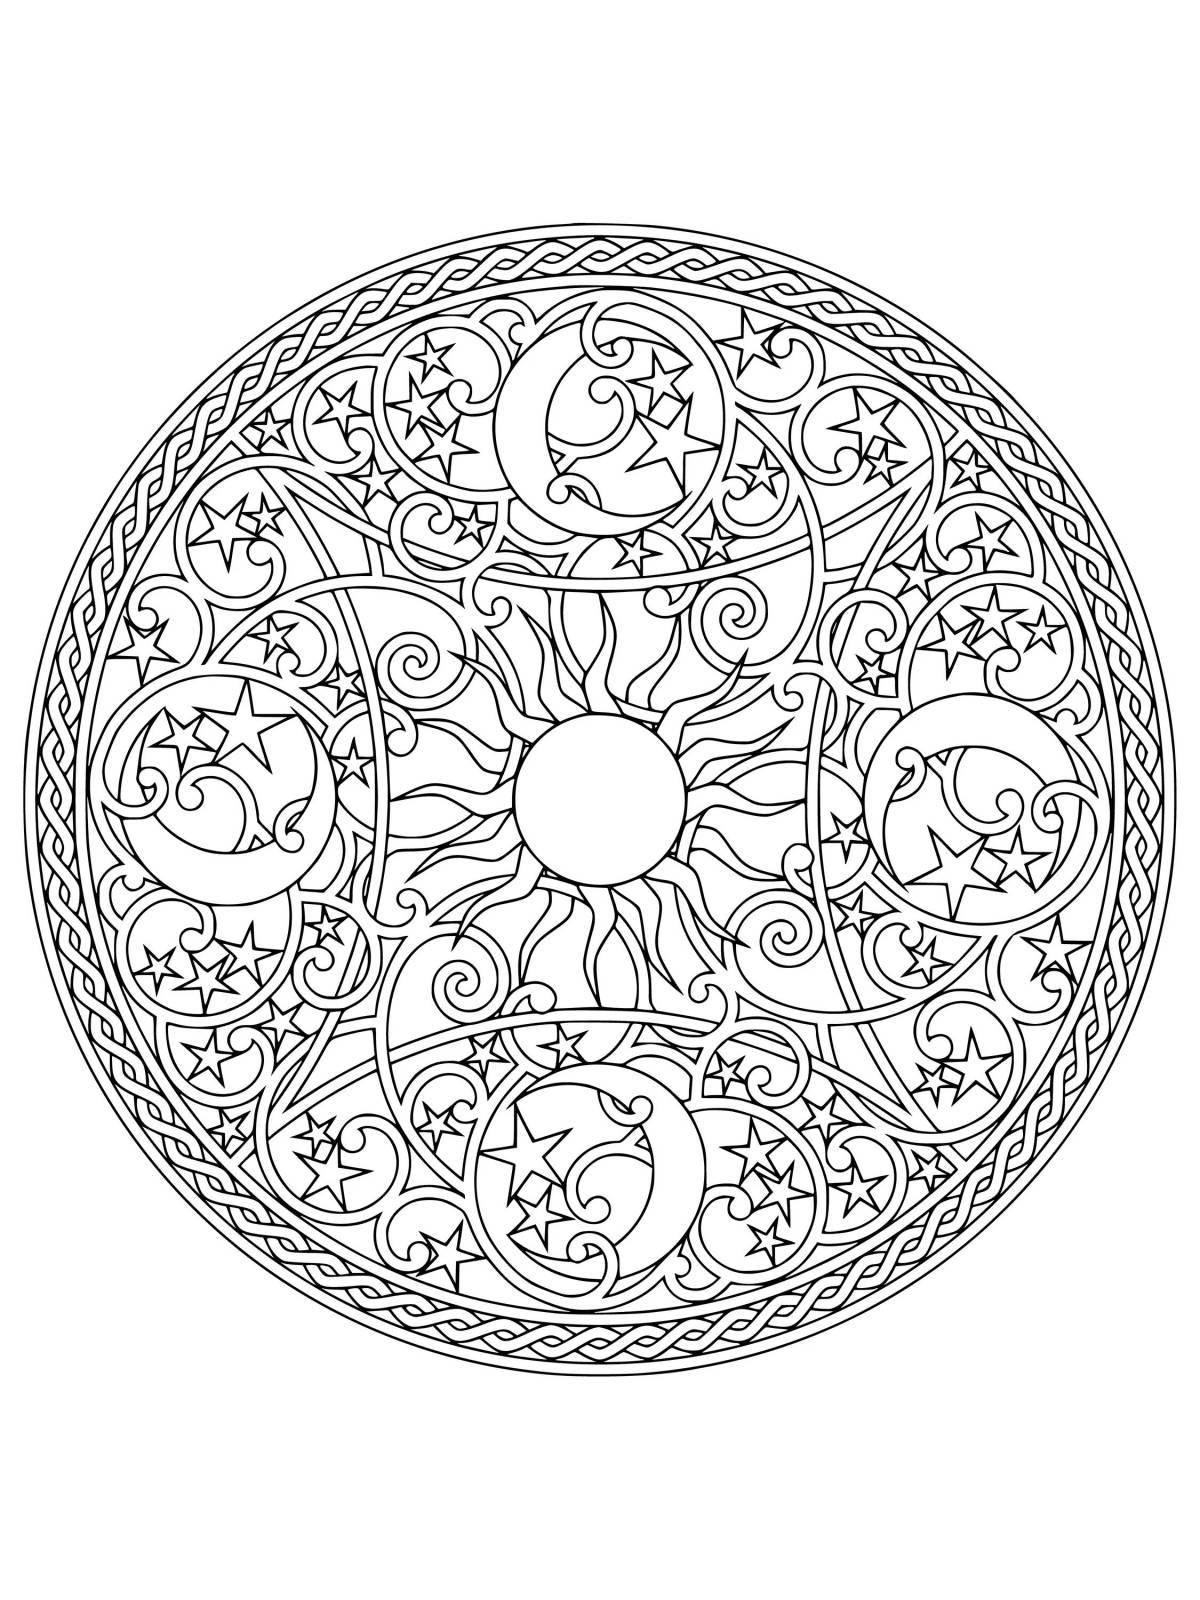 Humorous mantra coloring pages